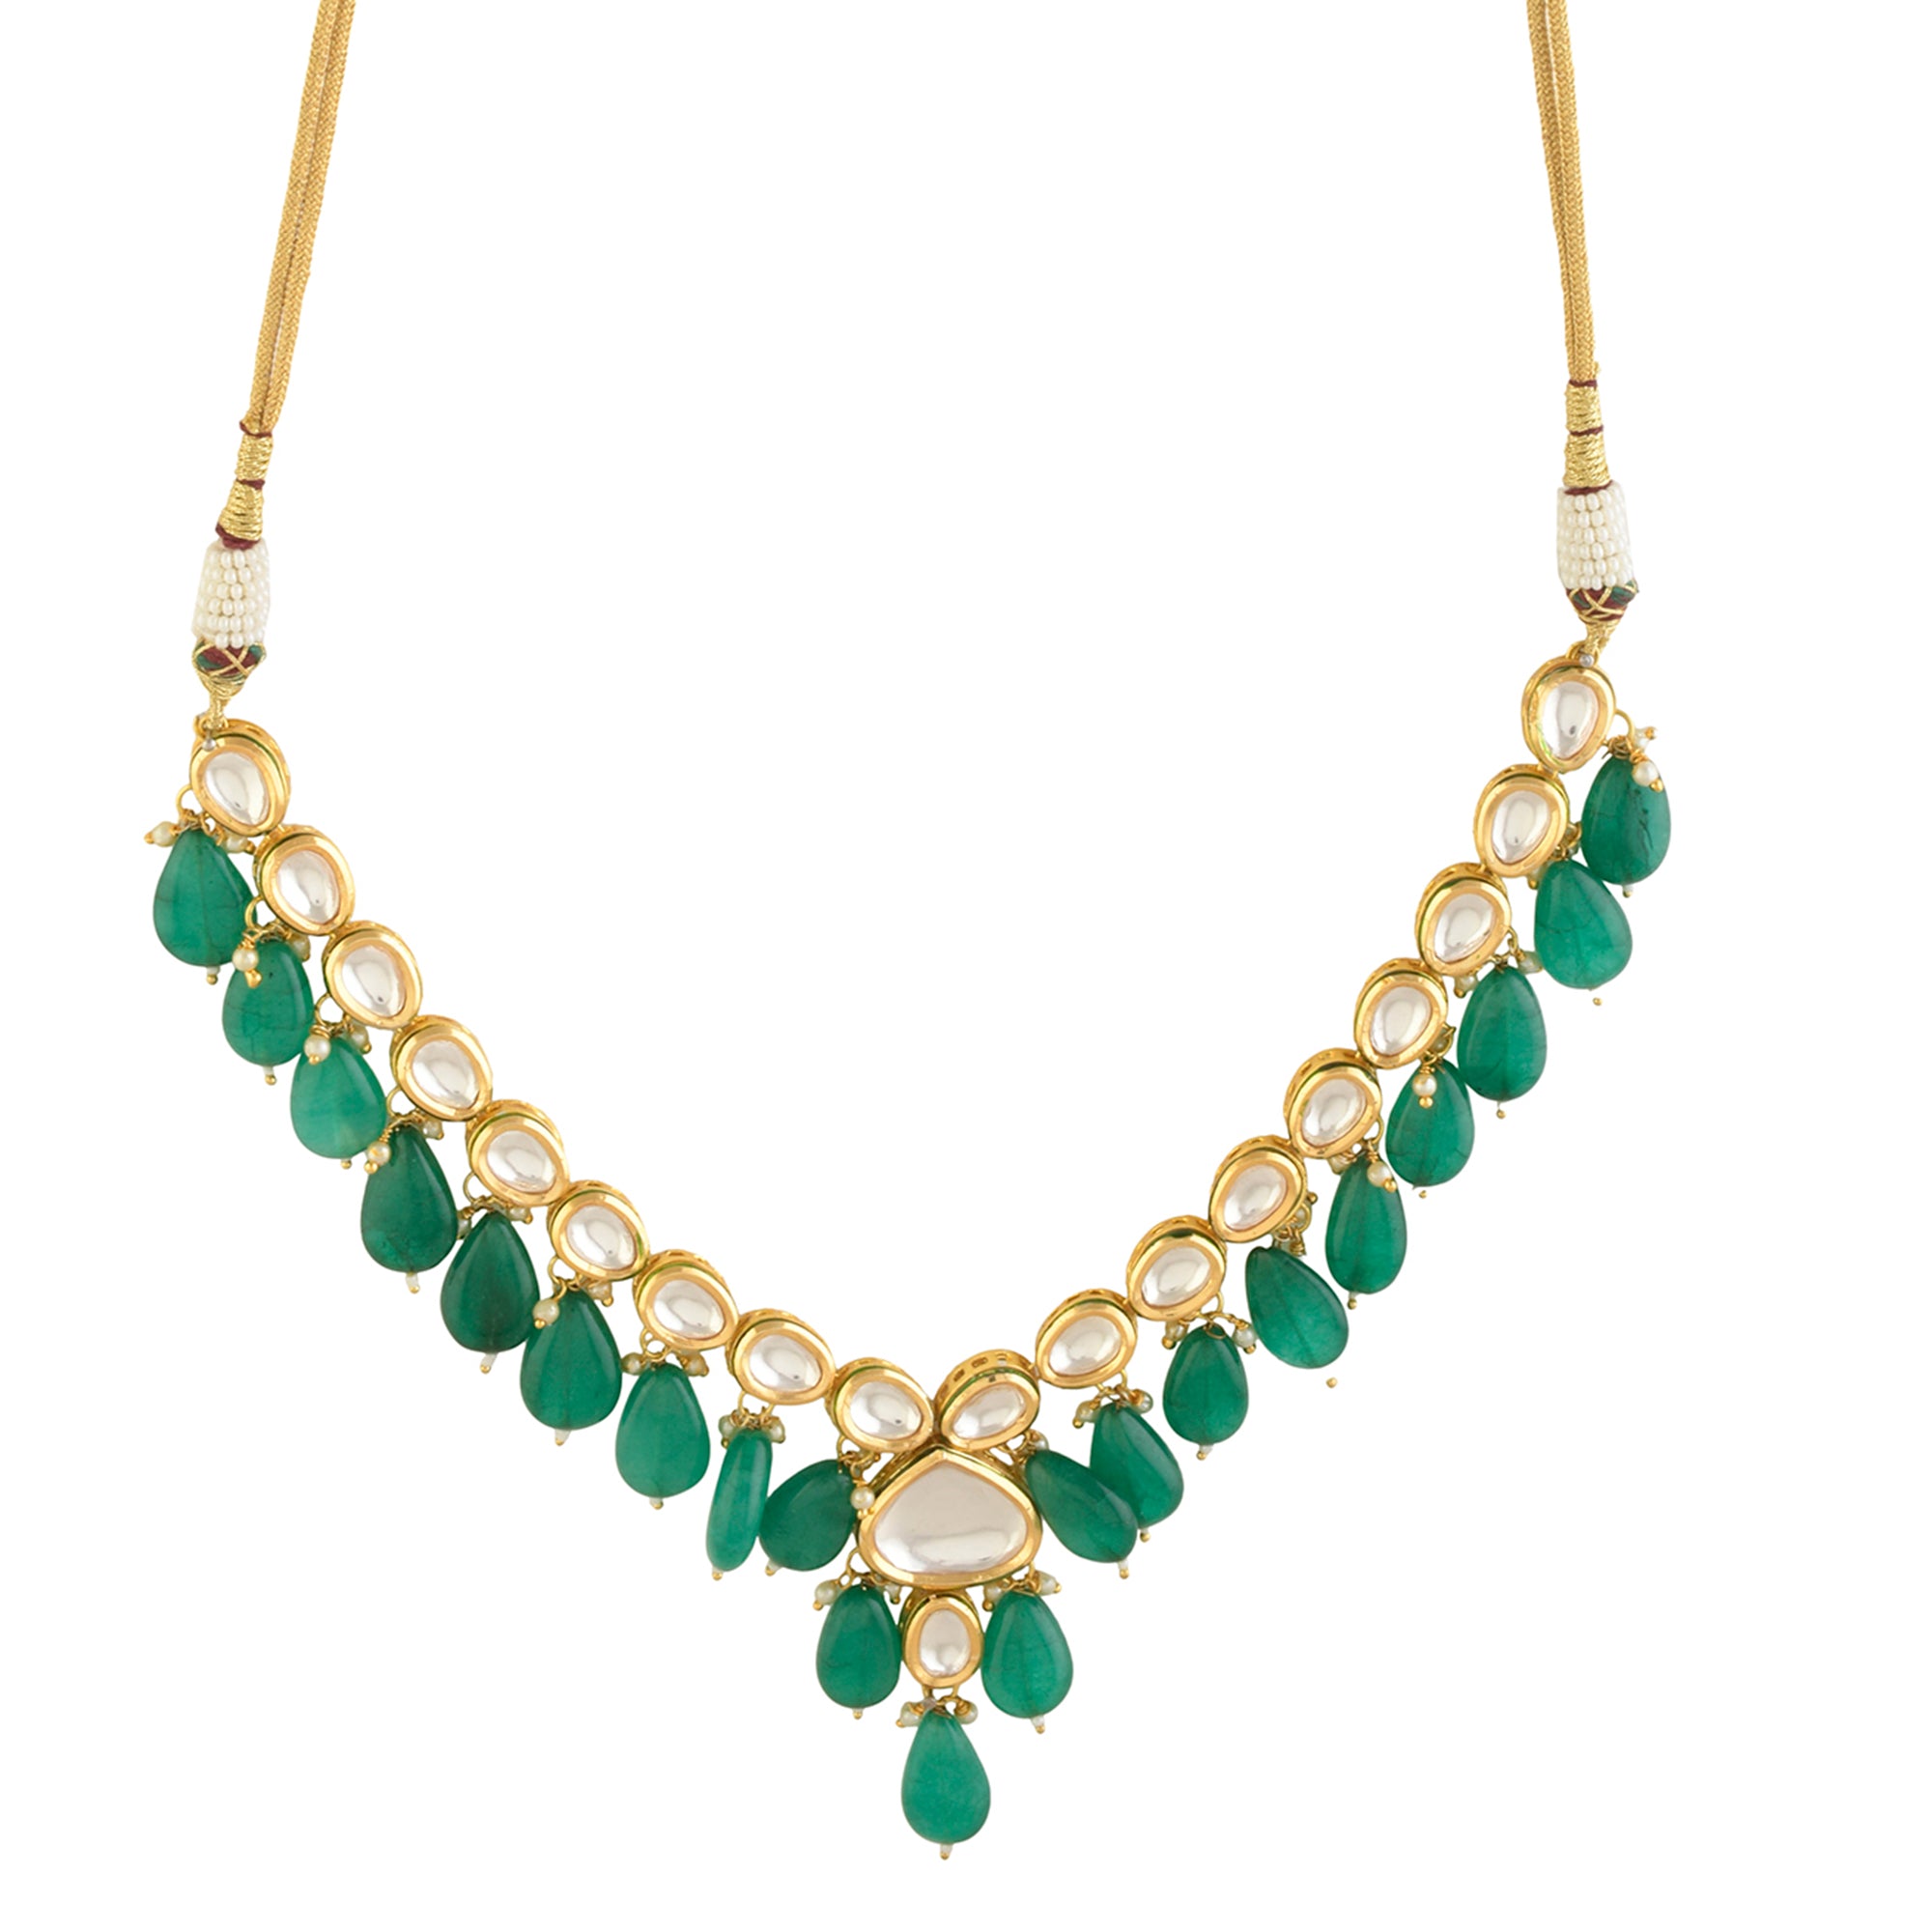 Emerald beaded Gold toned kundan inspired necklace with earrings